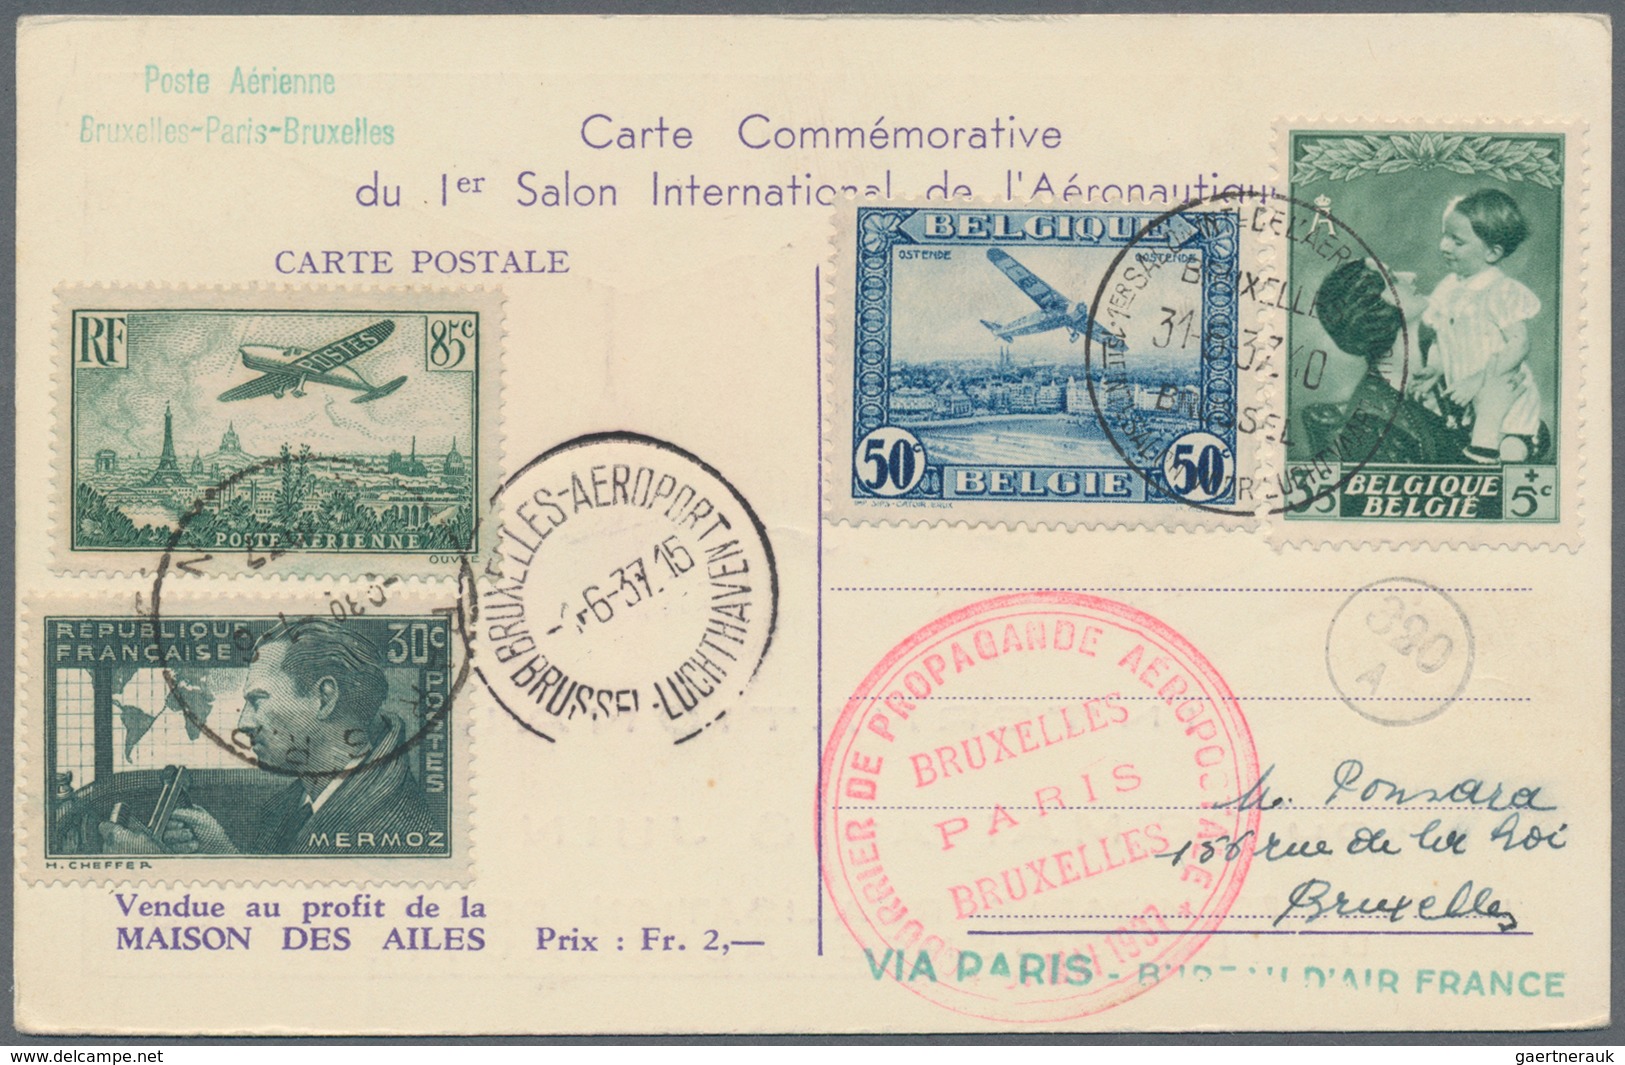 Flugpost Europa: 1937, Decorative Advertising Card For "1er Salon Del Aéronatique" On Reverse French - Europe (Other)